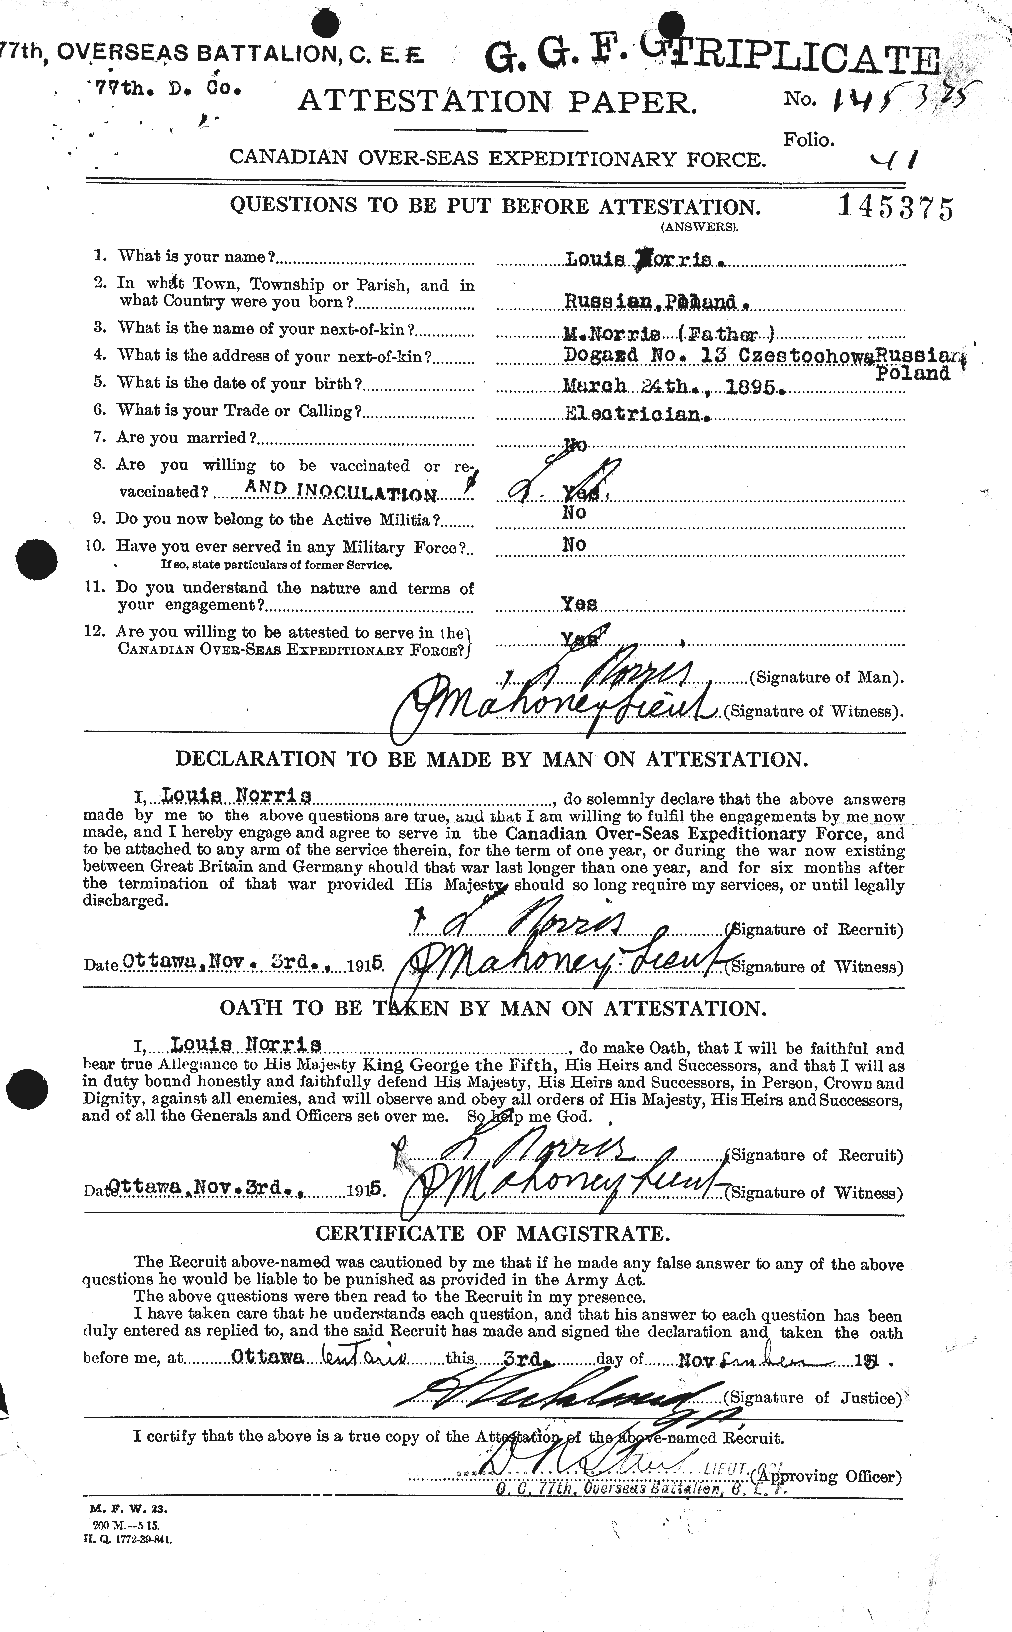 Personnel Records of the First World War - CEF 549738a